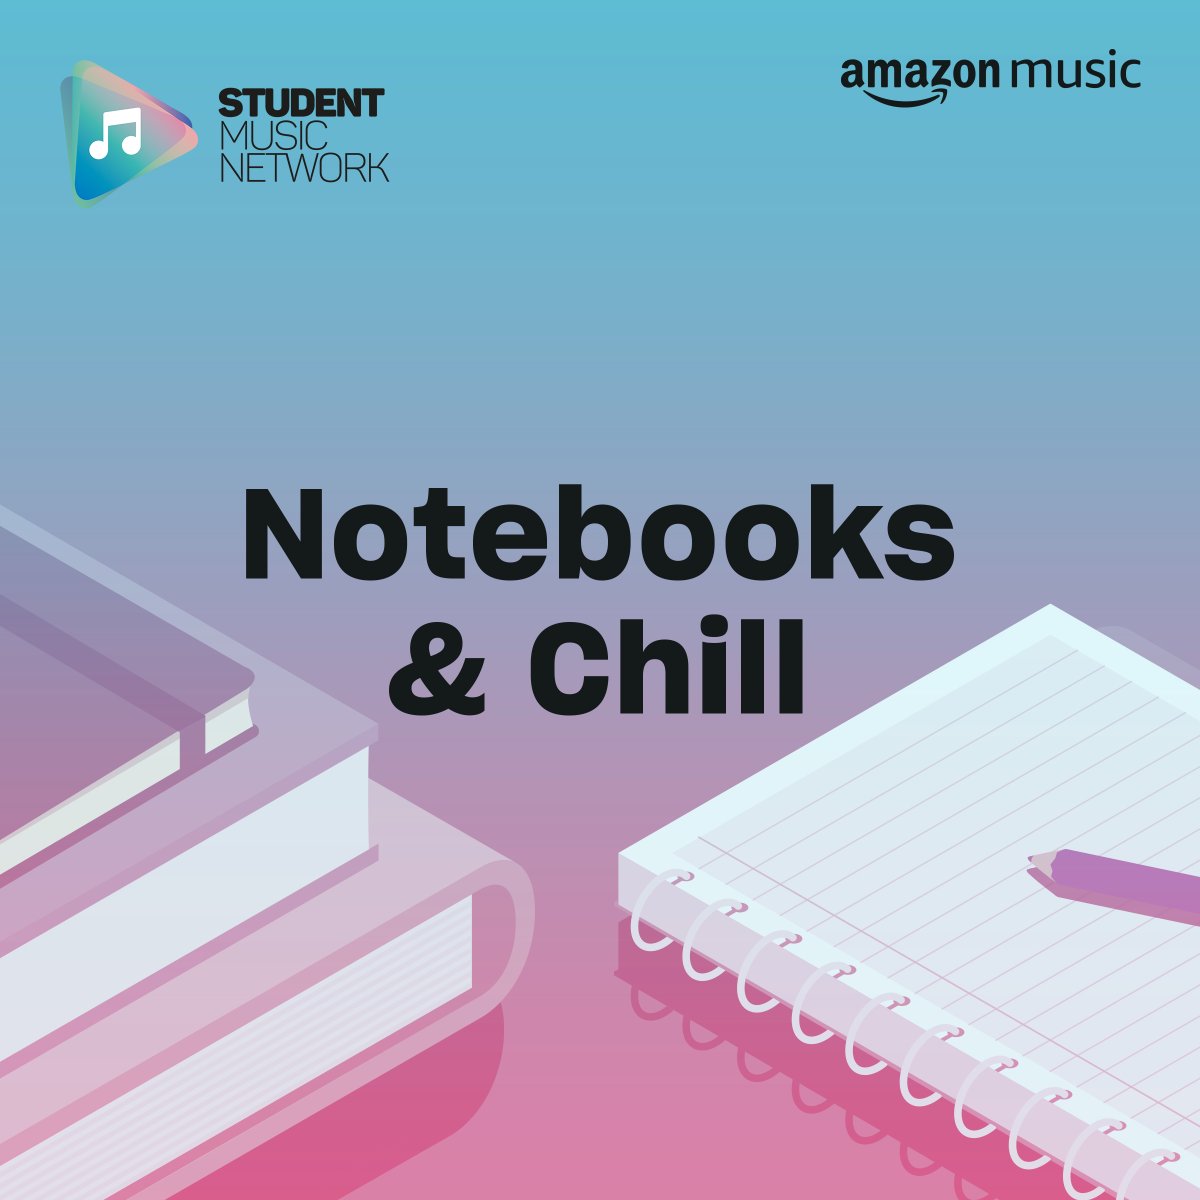 Settle into the library this weekend with our @AmazonMusicUK 'Notebooks & Chill' playlist ✨ 📚 With gentle rhythms and motivational beats, this one is specially curated to aid those study sessions. Give it a listen directly on Amazon Music 🔗 #studymusic #chillmusic